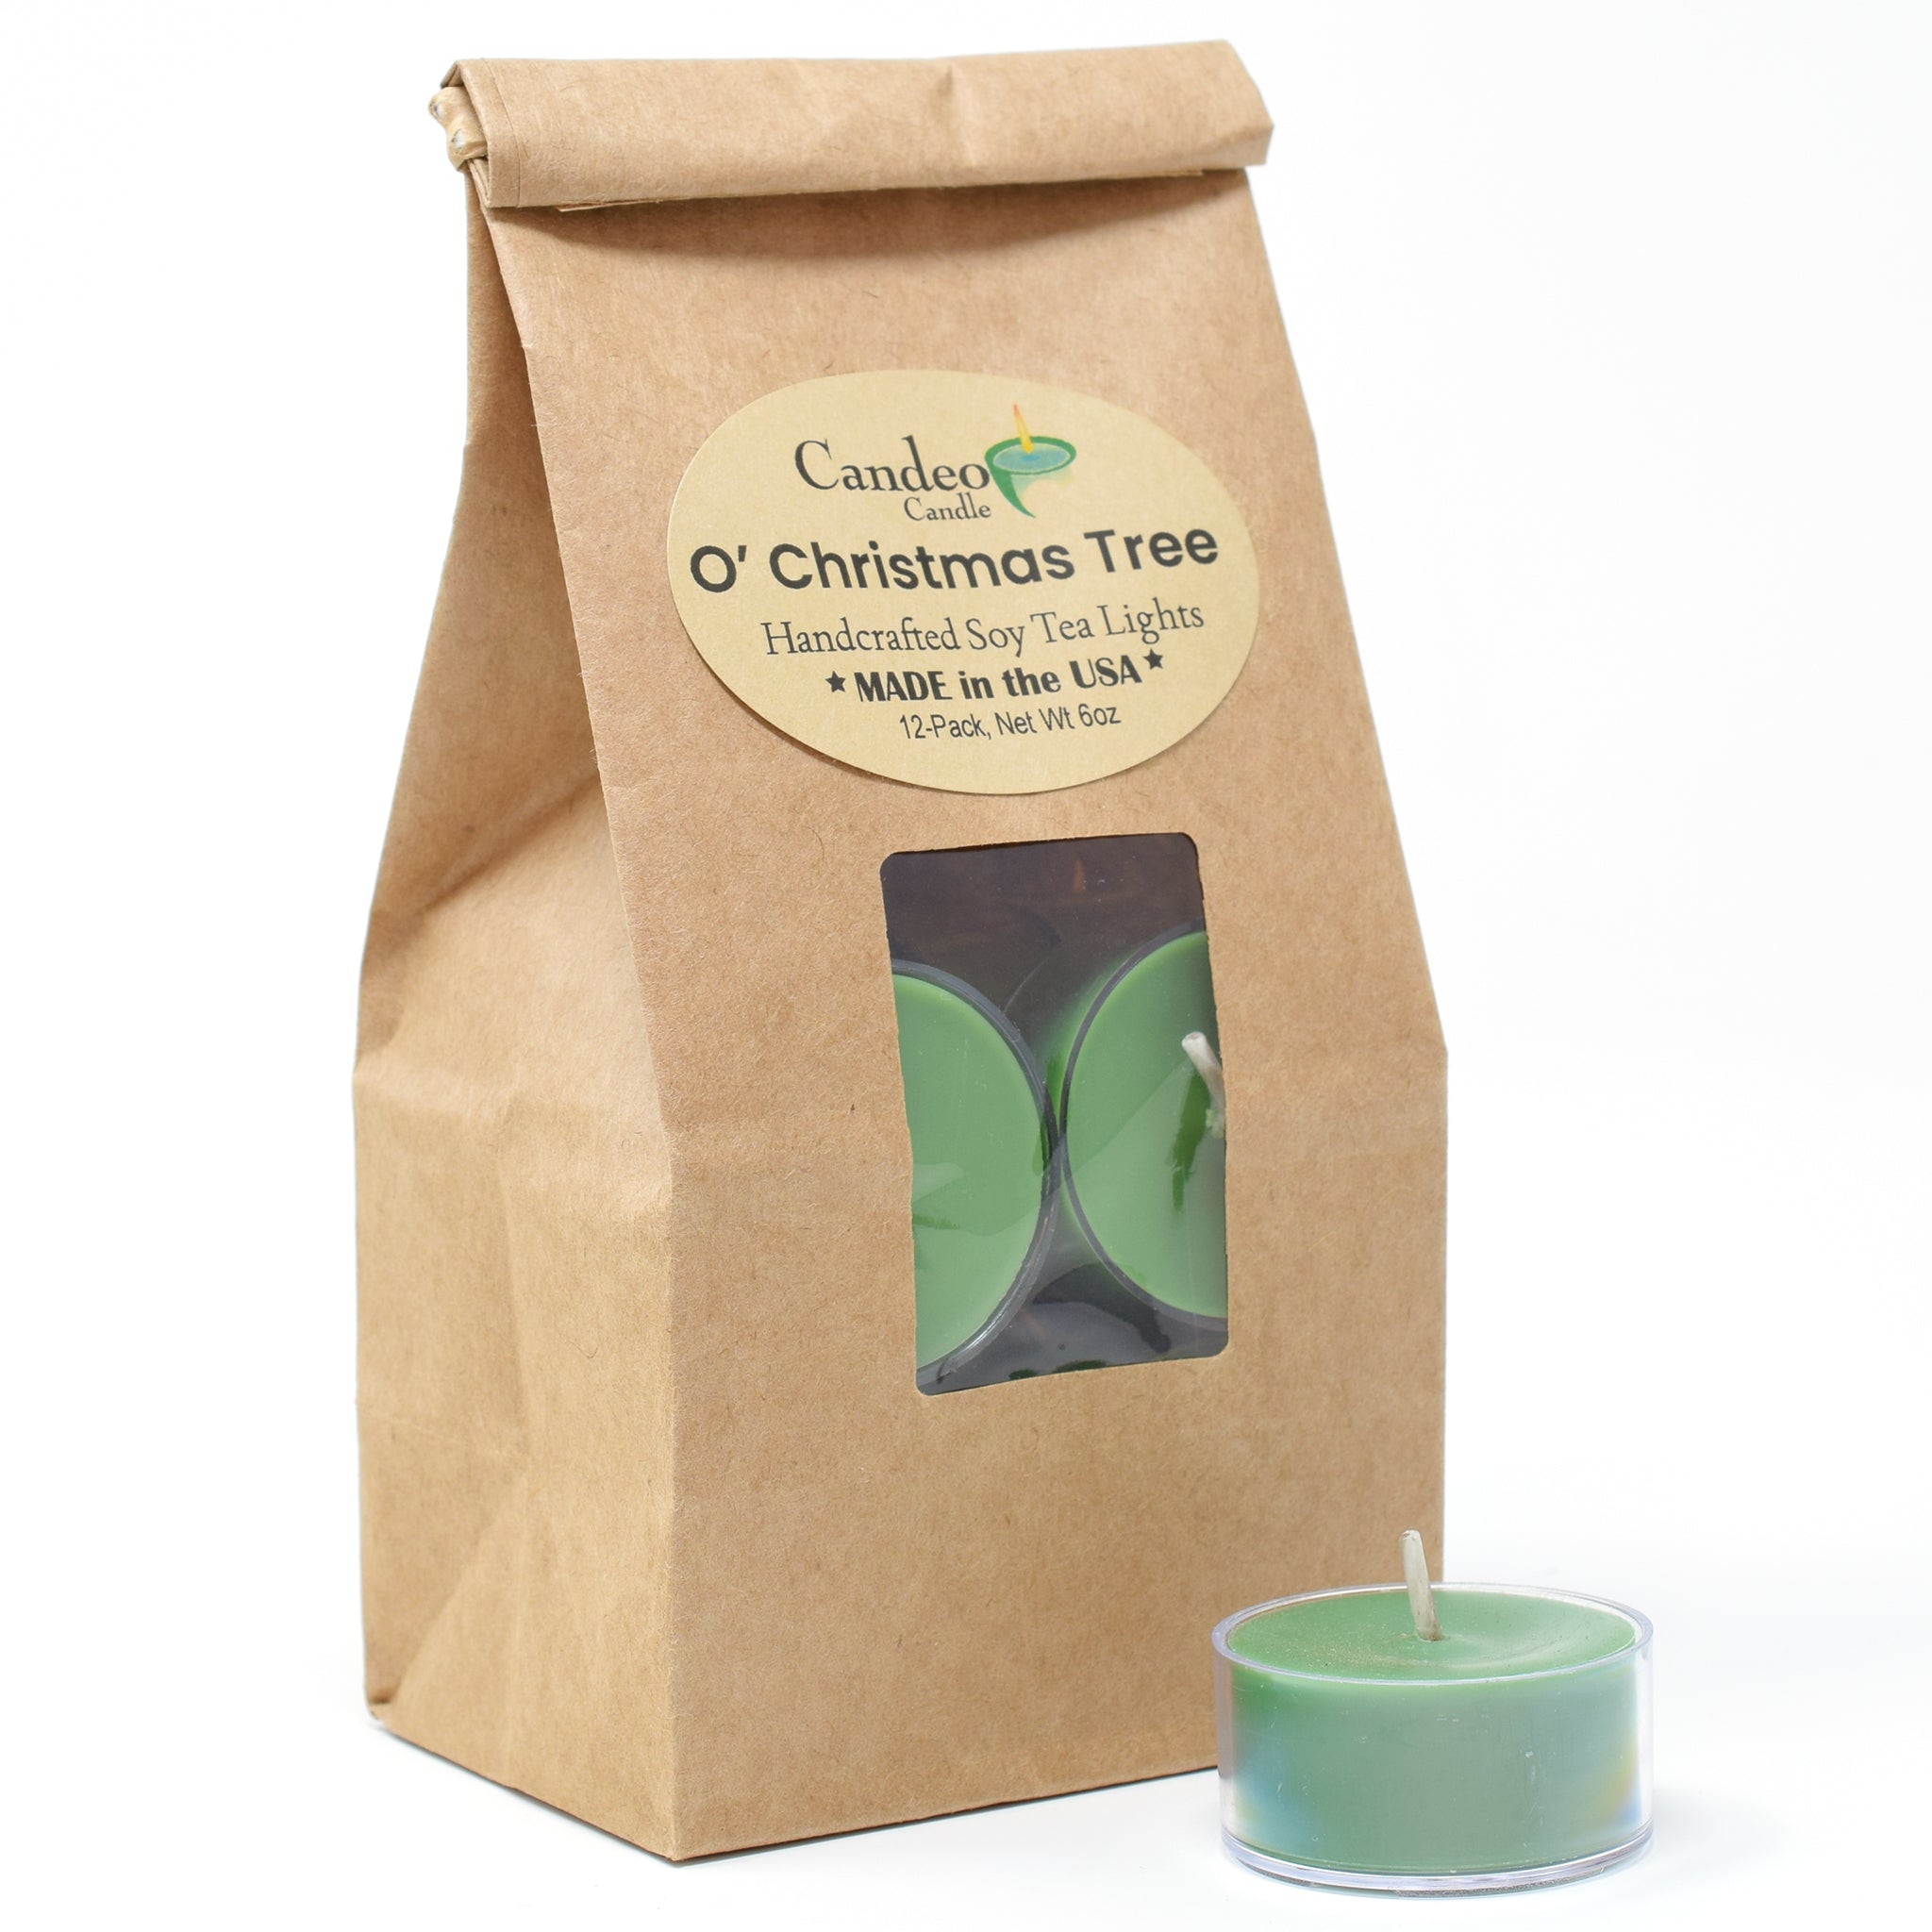 O'Christmas Tree, Soy Tea Light 12-Pack - Candeo Candle